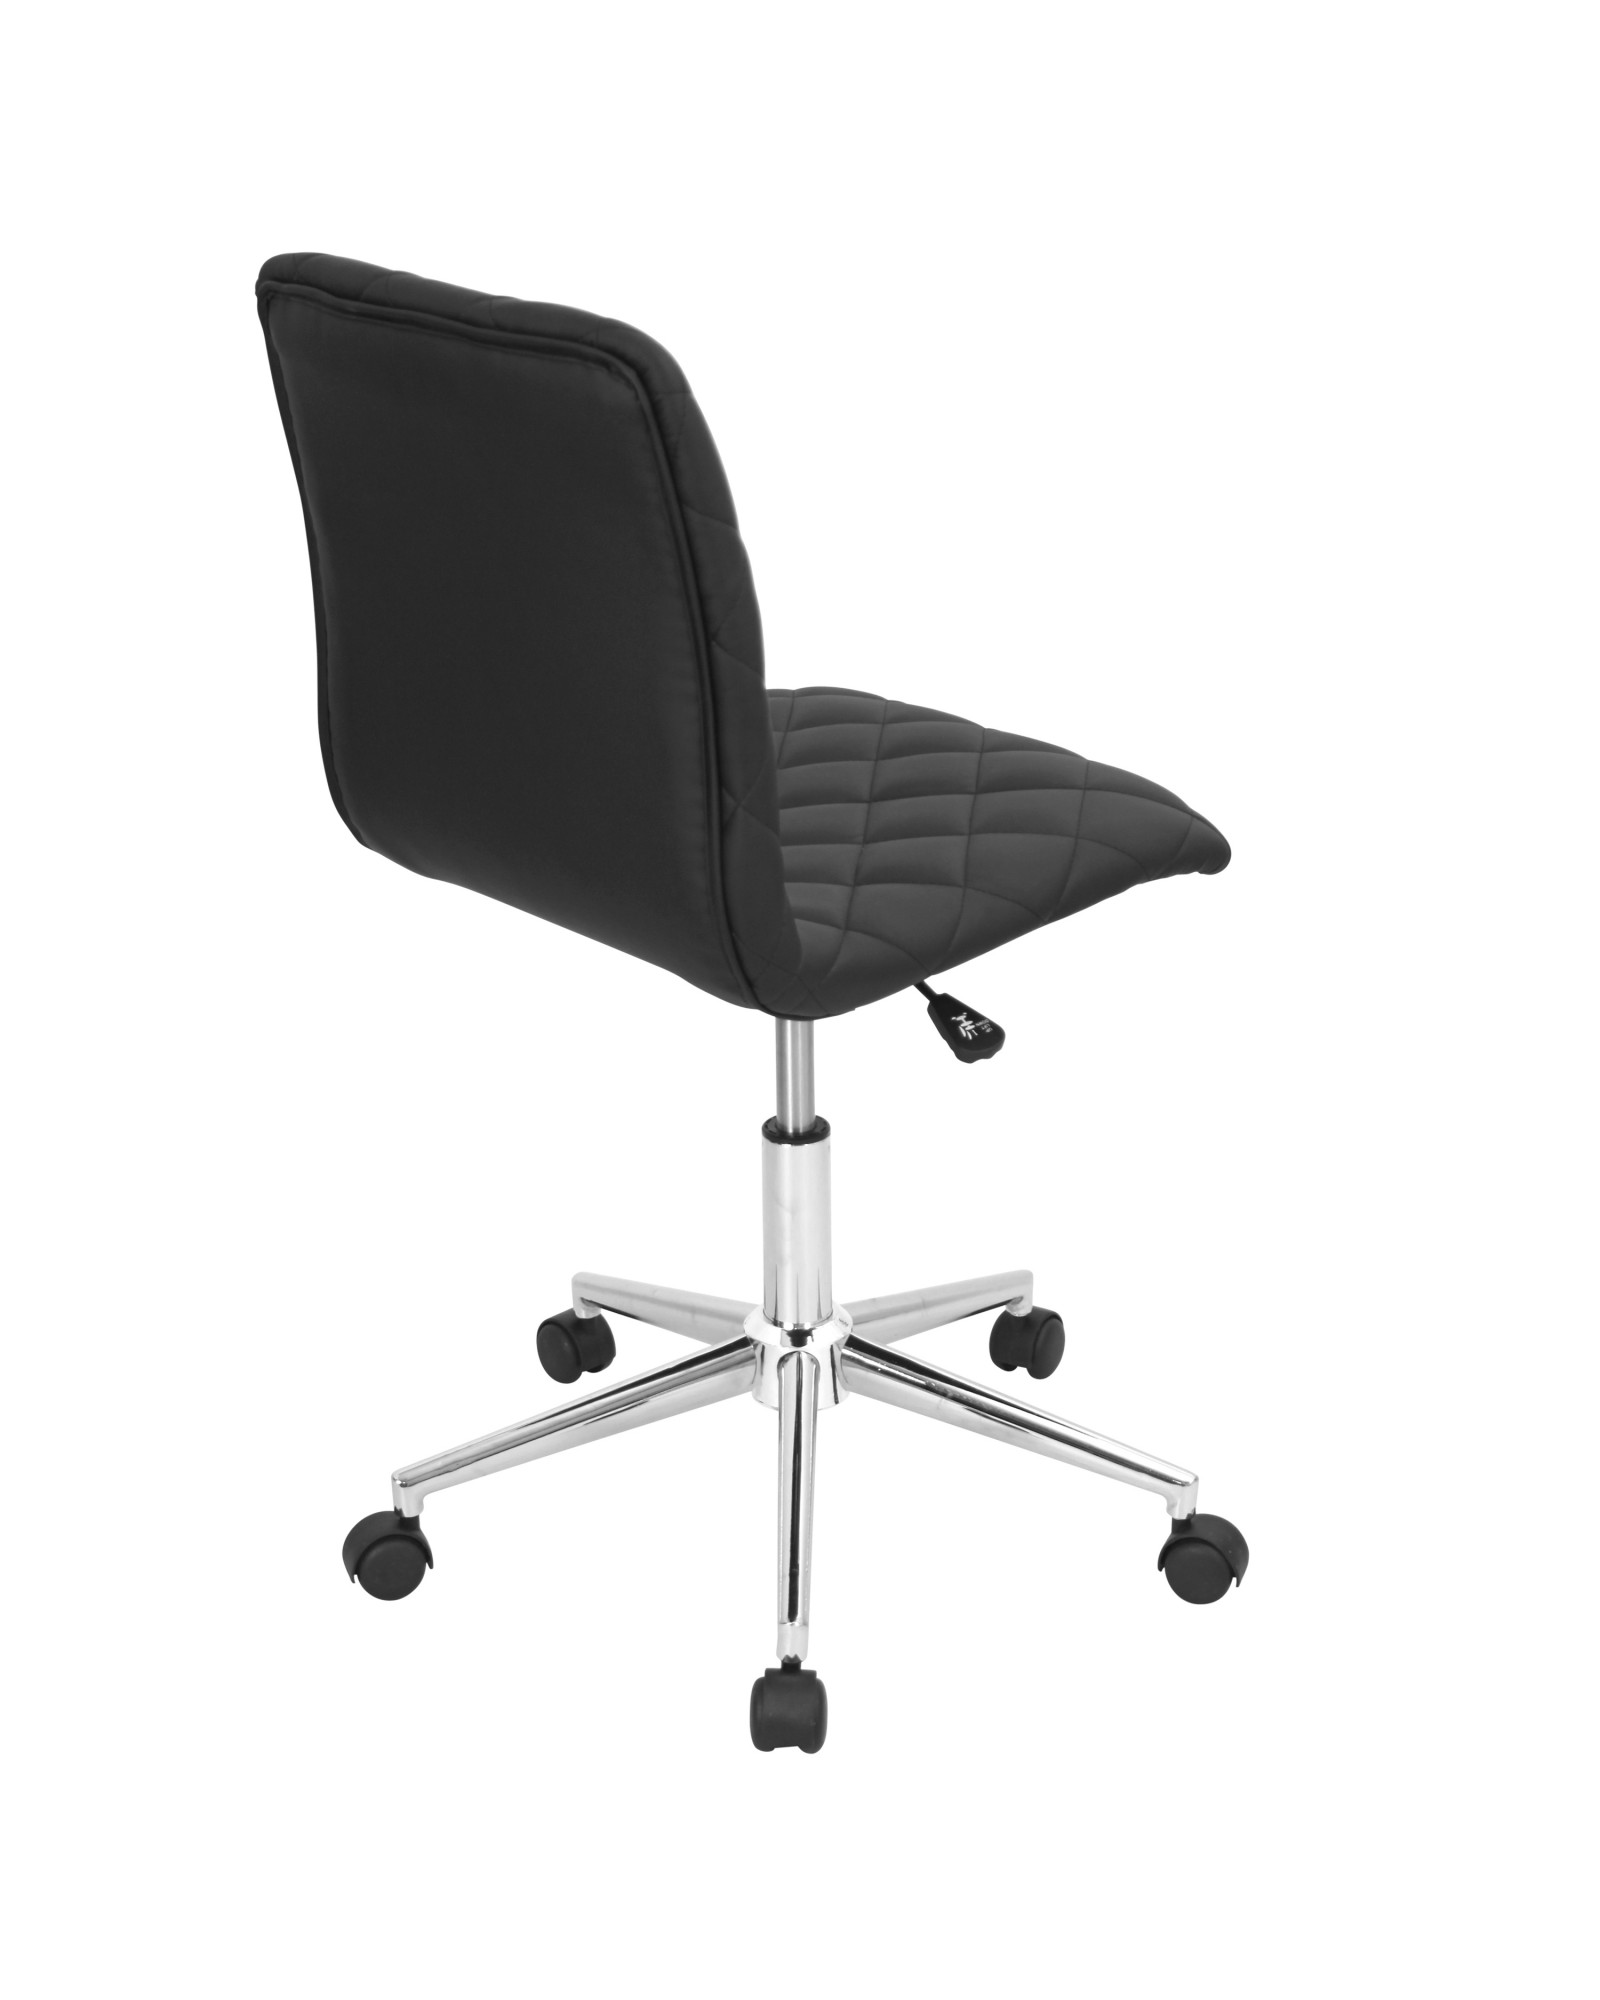 Caviar Contemporary Adjustable Office Chair in Black Faux Leather